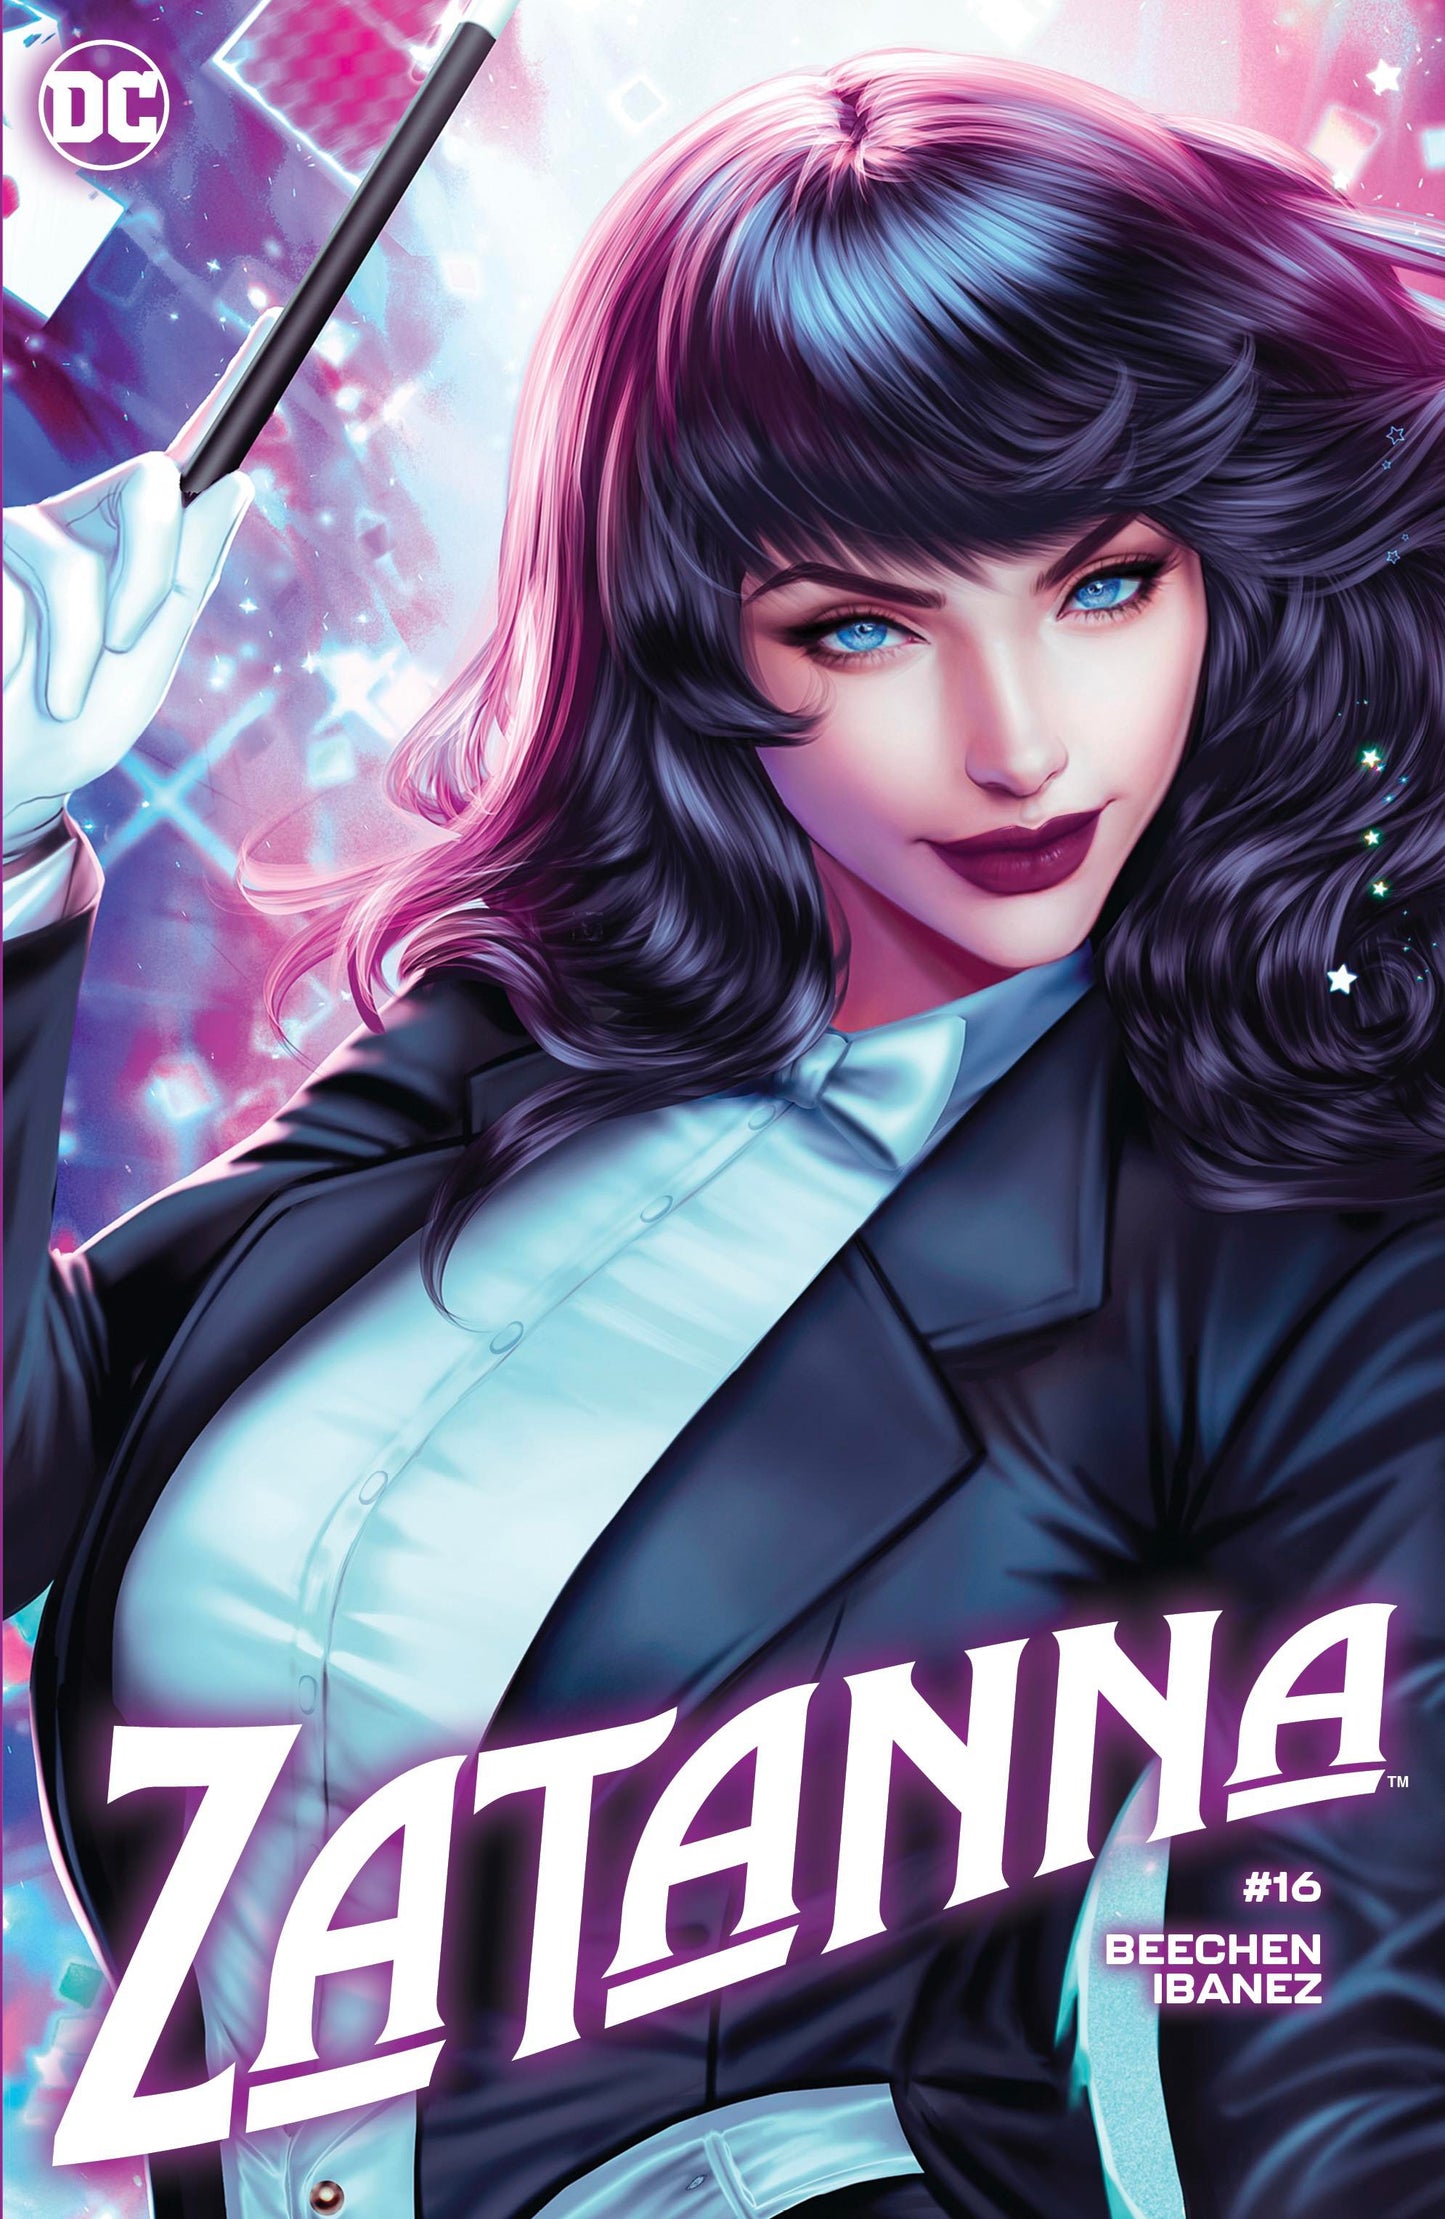 ZATANNA #16 ARIEL DIAZ TRADE DRESS VARIANT LIMITED TO 800 COPIES WITH NUMBERED COA